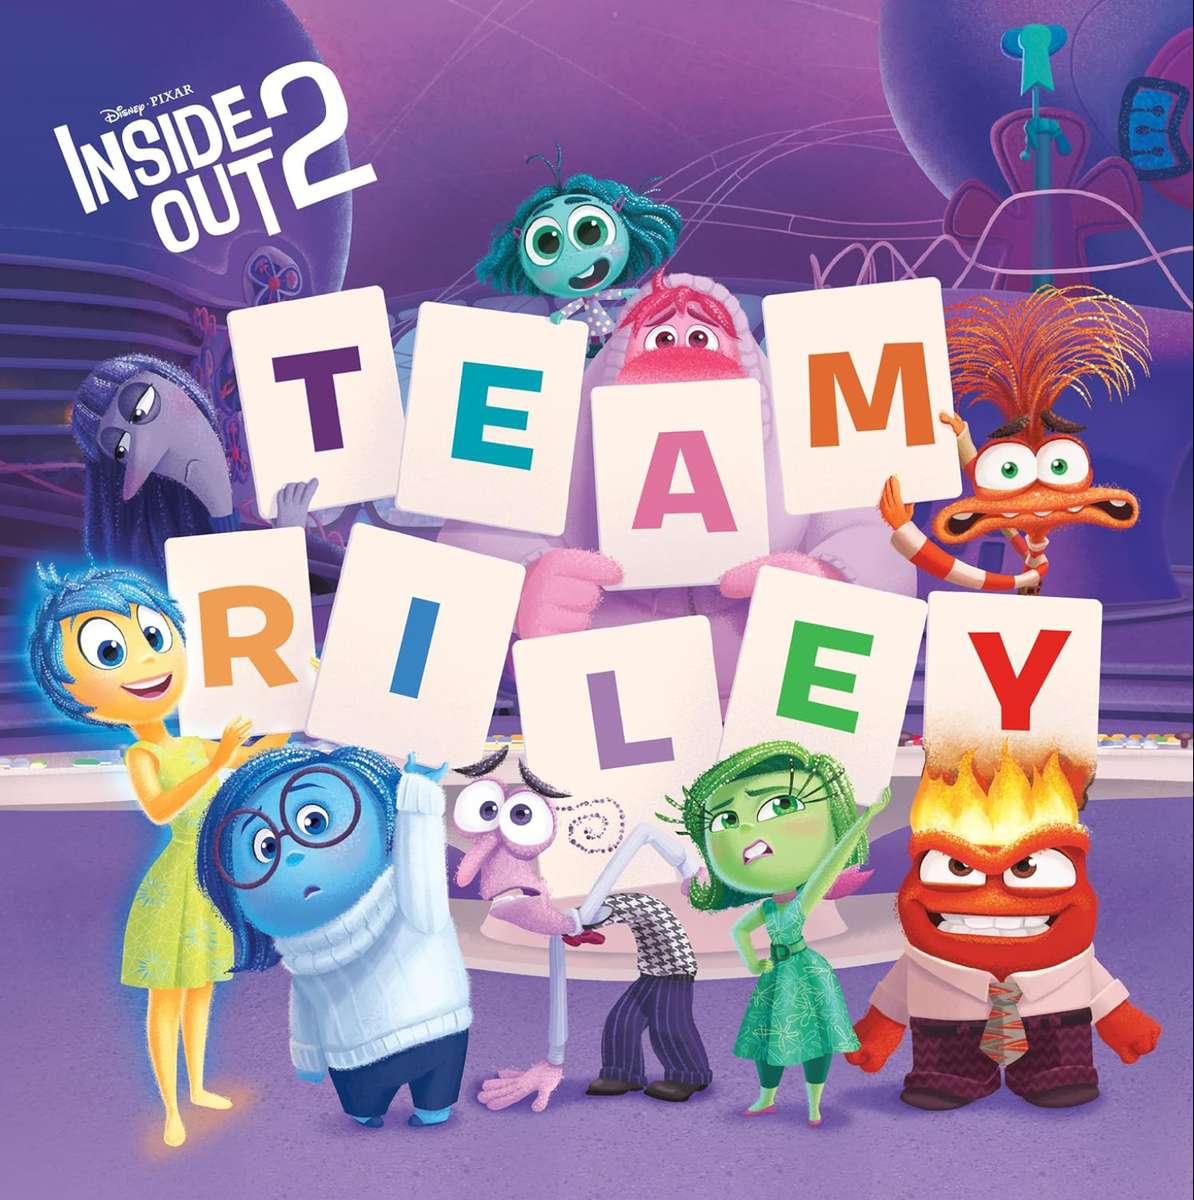 Inside Out 2 Pictureback Book❤️❤️❤️❤️ Online-Puzzle